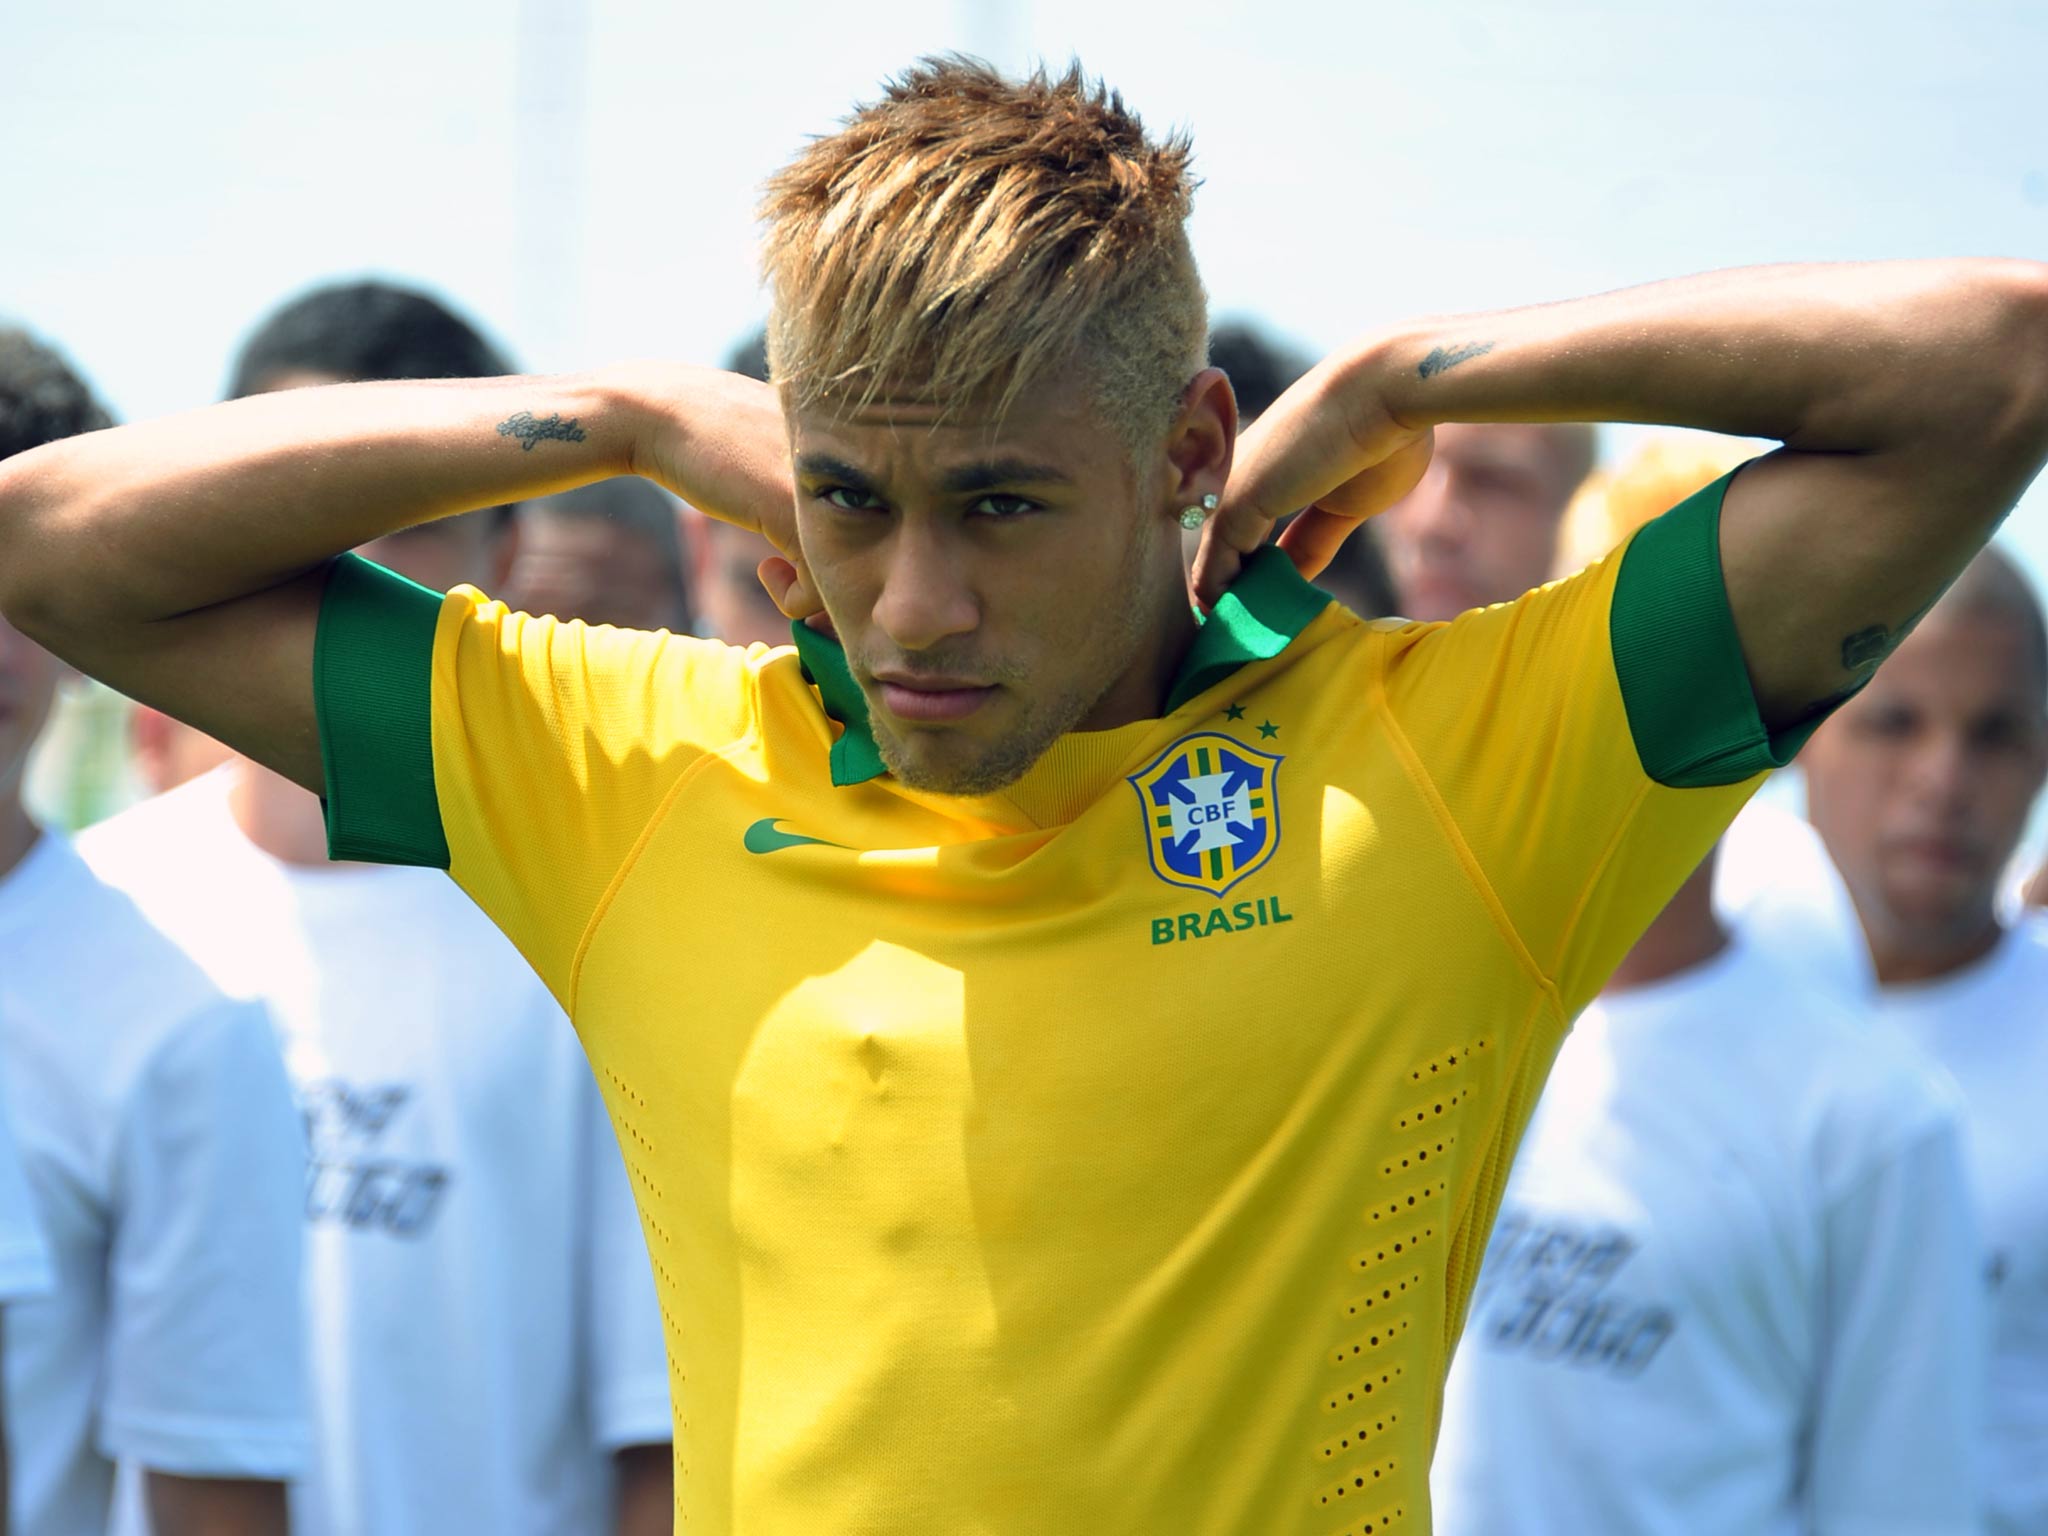 <b>Neymar</b><br/>
Has scored 17 goals in just 27 appearances for his country, and has remained in Brazil with Santos despite interest from elsewhere. The 21-year-old forward will no doubt be Brazil's main attacking threat.